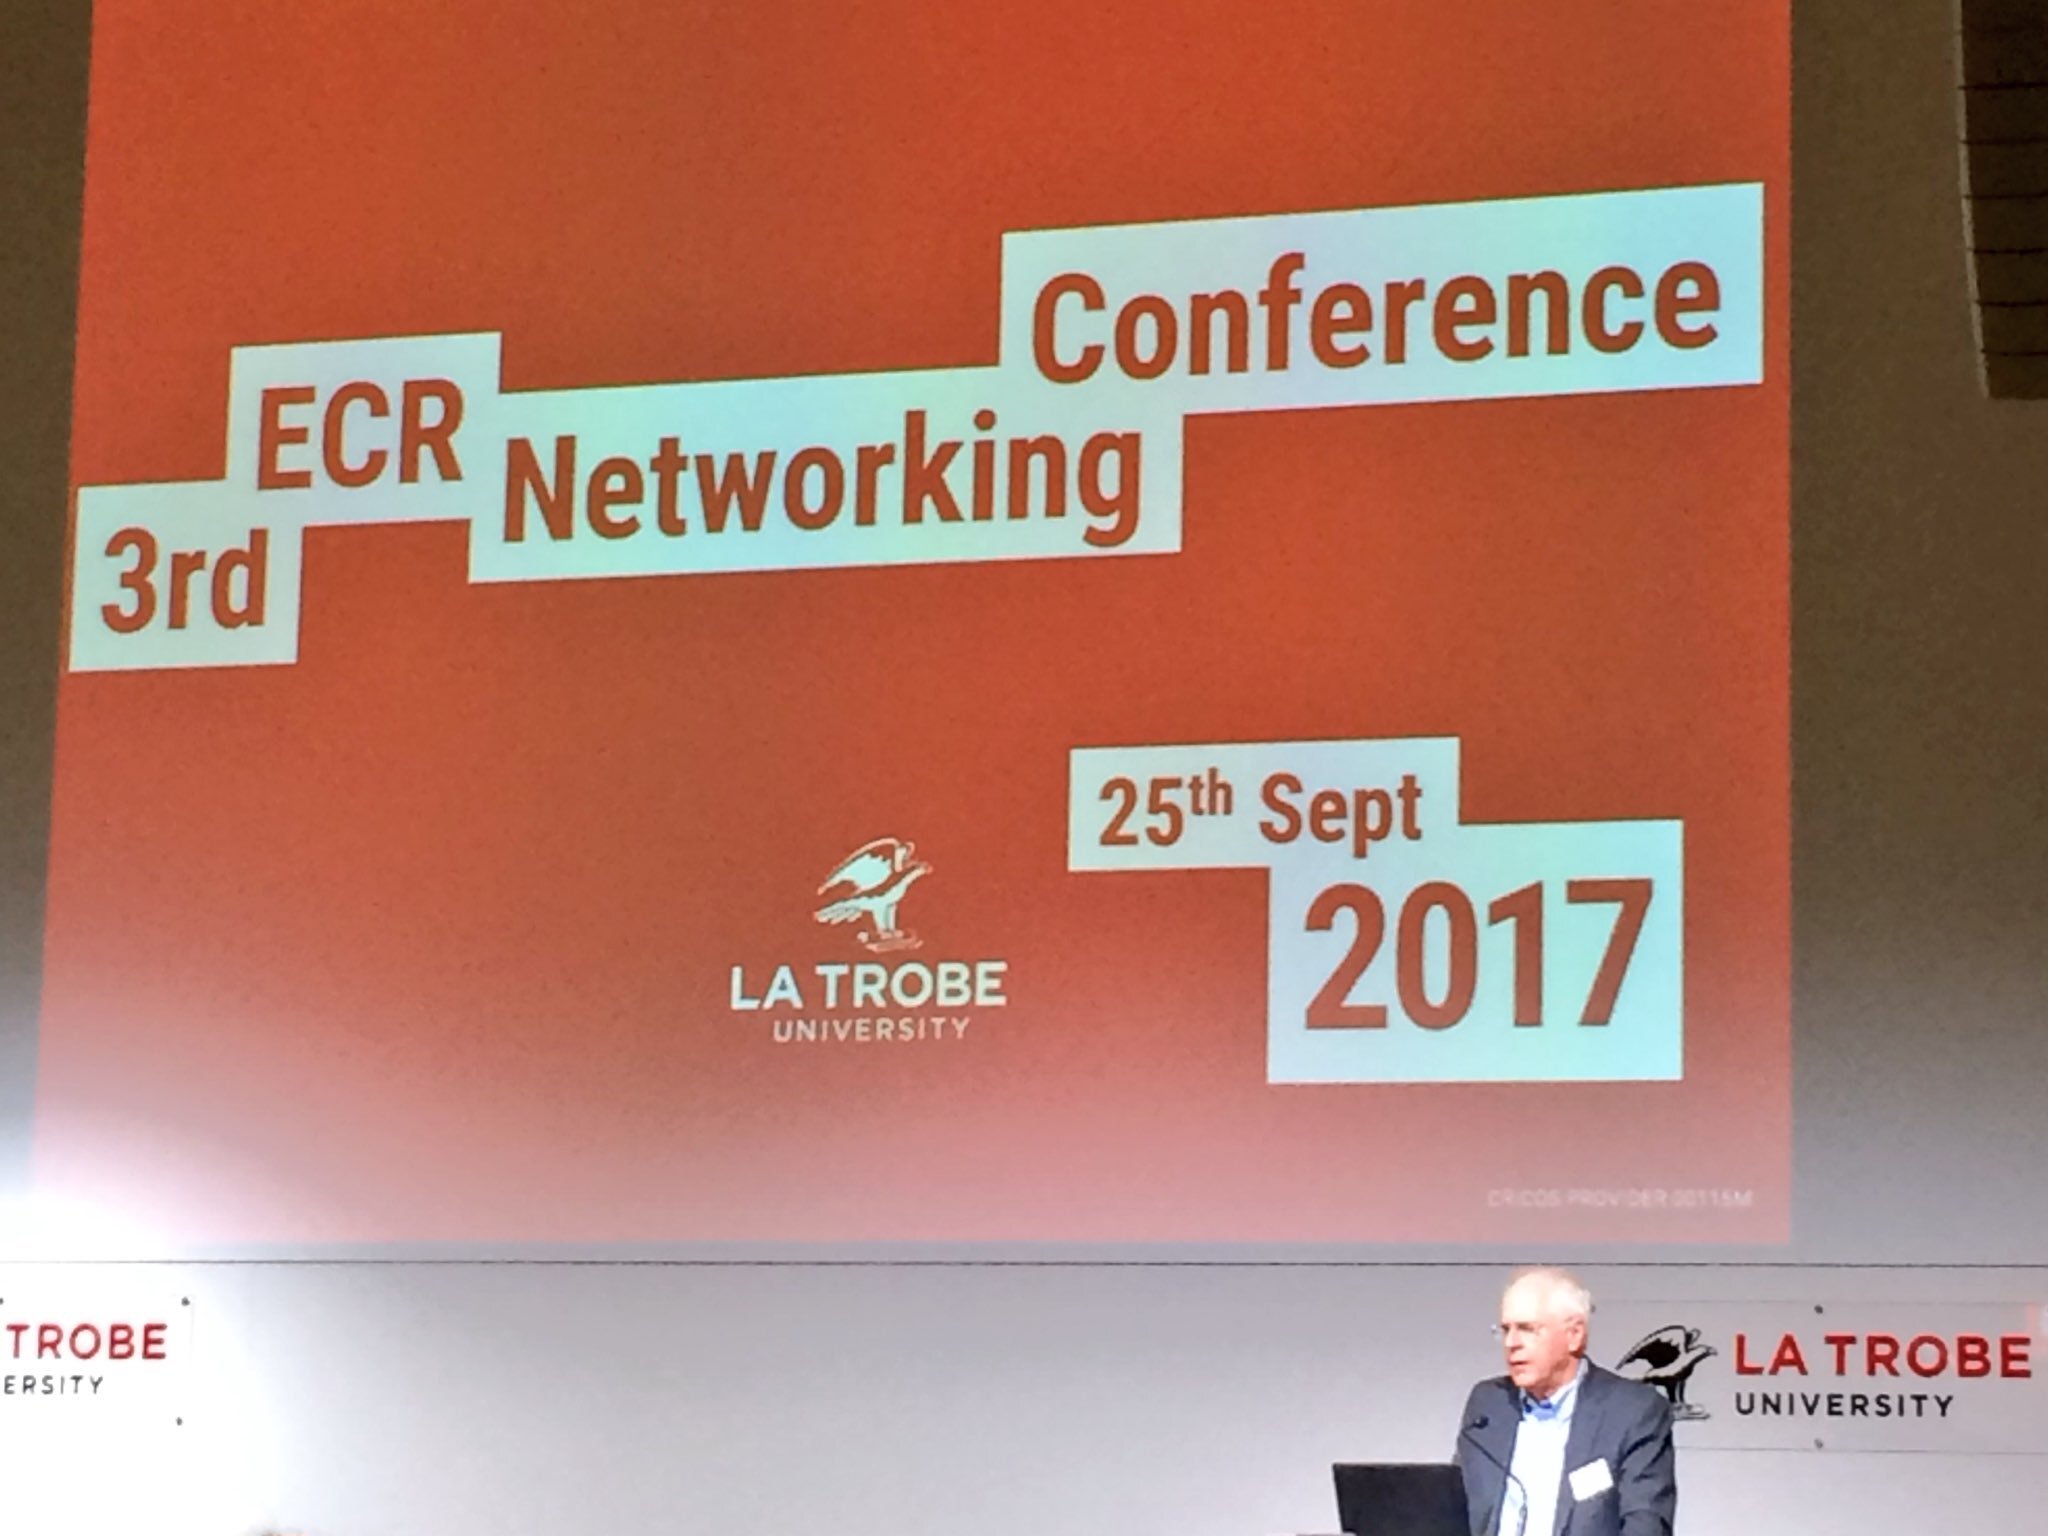 La Trobe's 3rd Early Career Researcher Networking conference